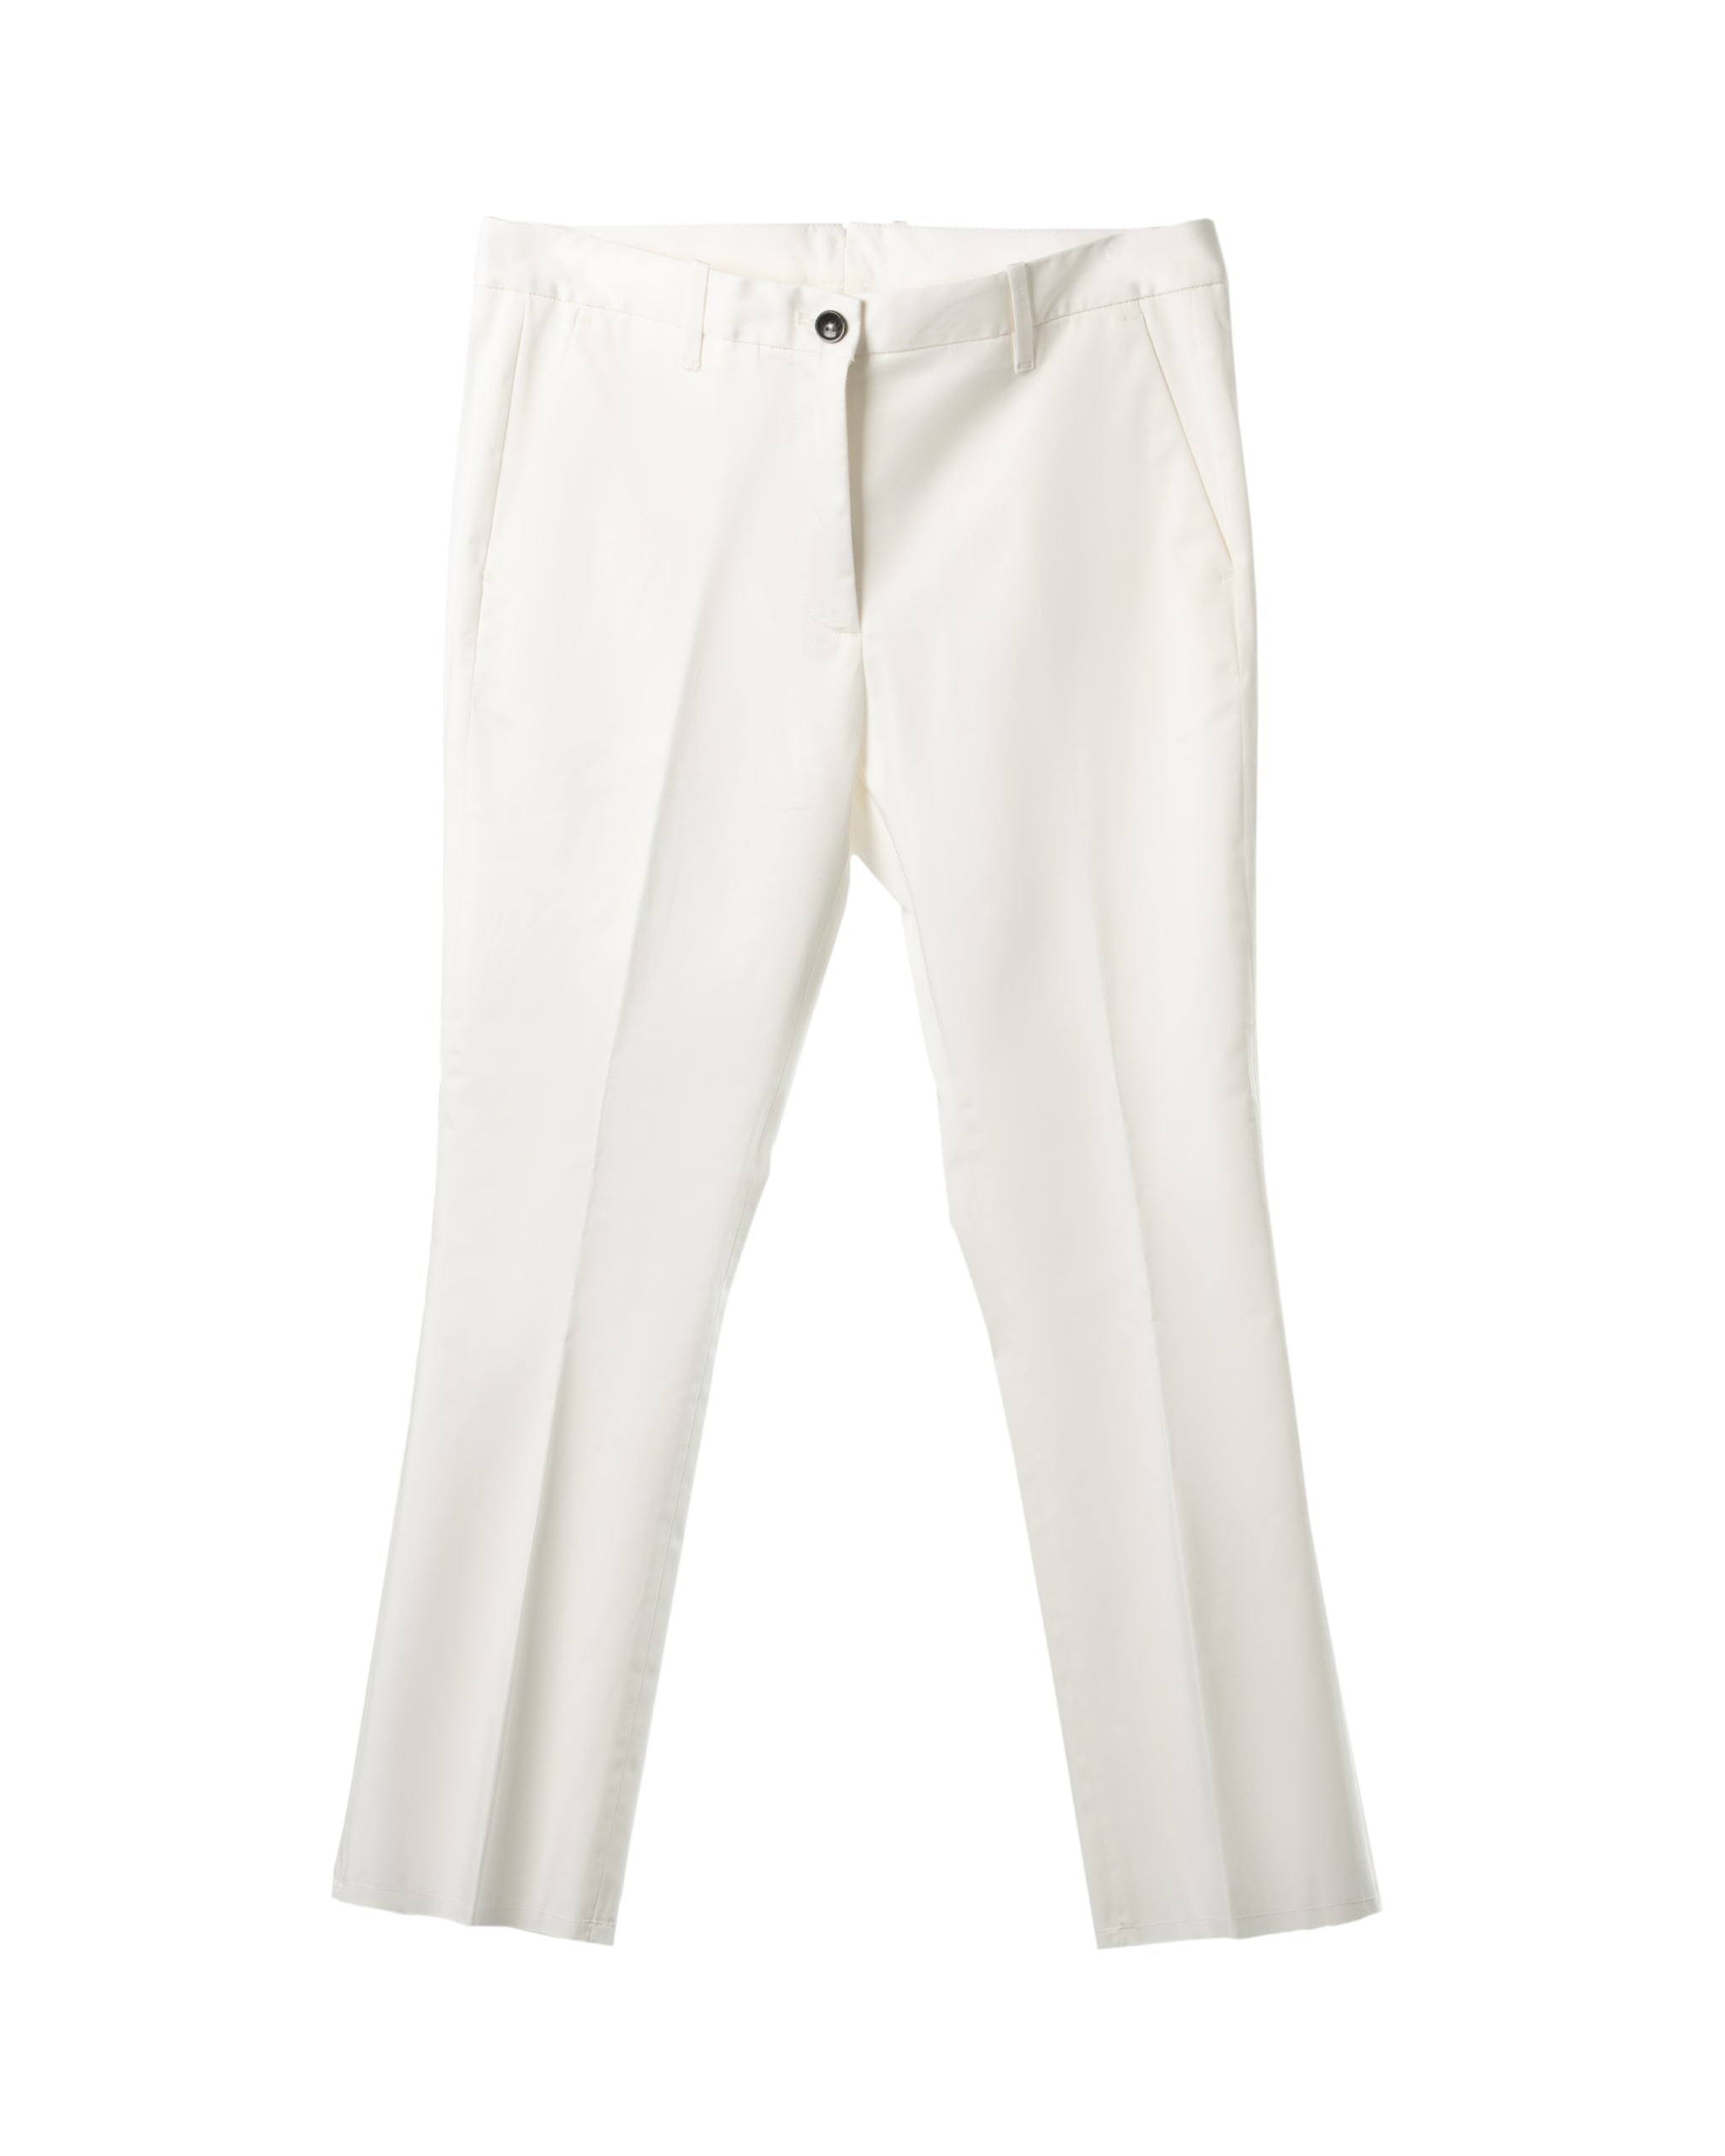 TECHNO STRETCH FLAIR CHINO WITH OPEN FRAME